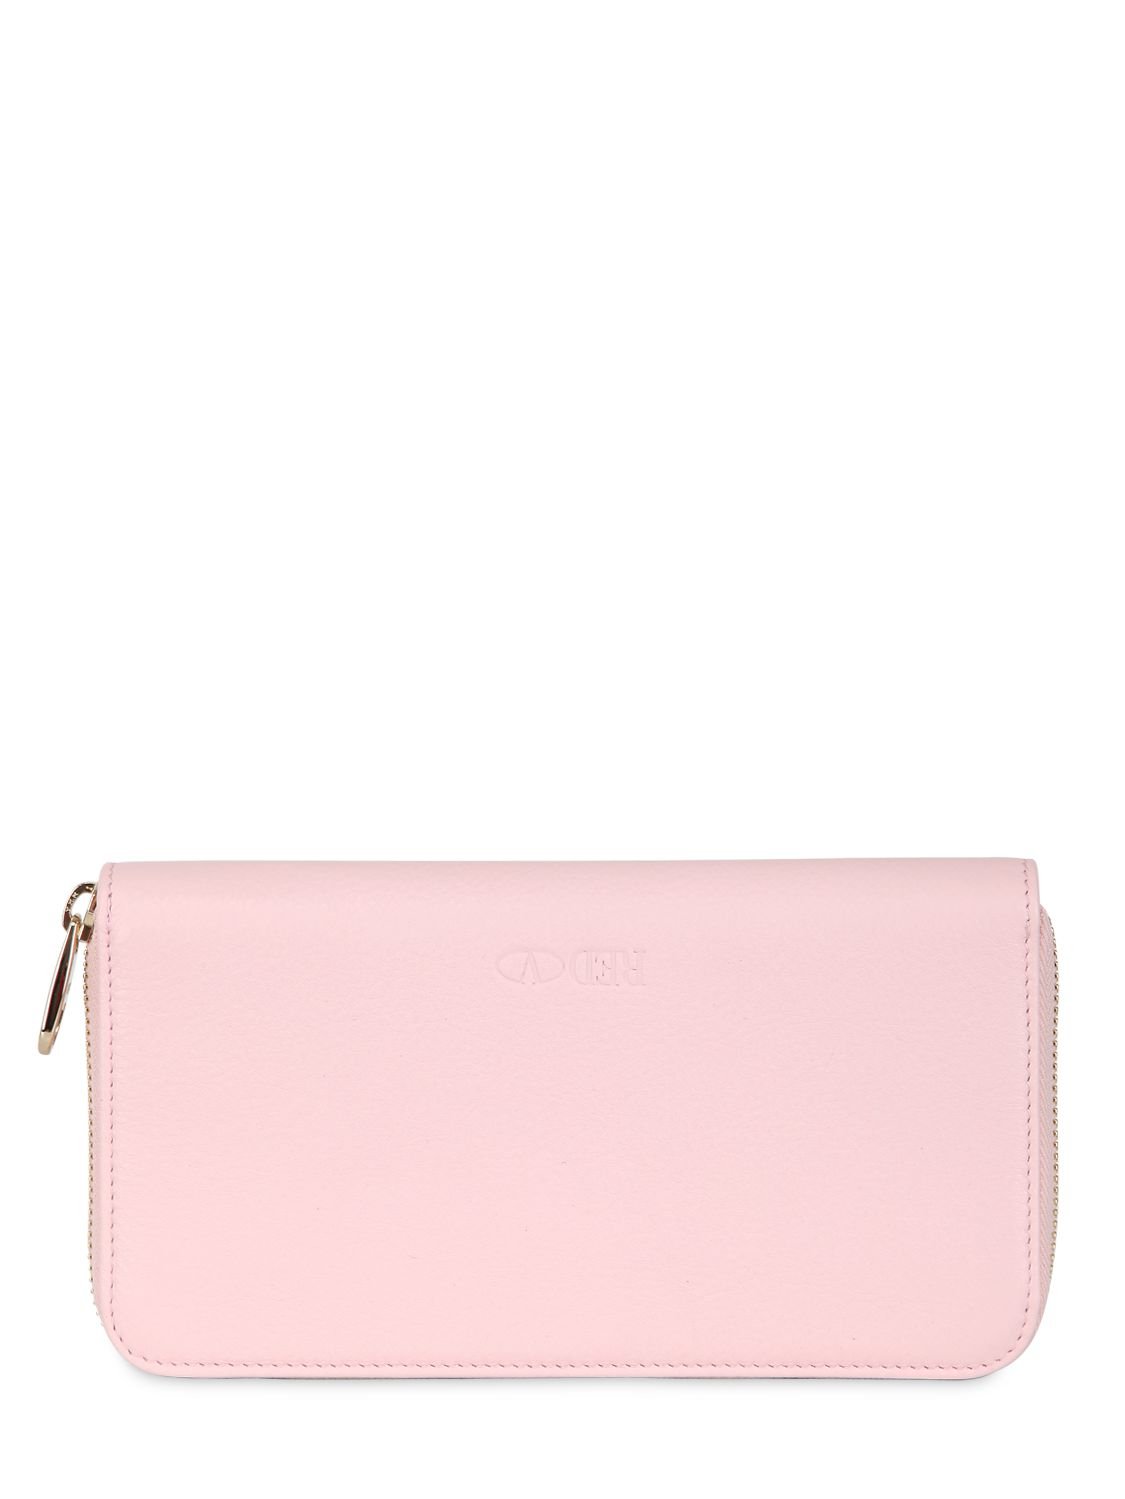 Lyst - Red Valentino Bow Leather Zip Around Wallet in Pink